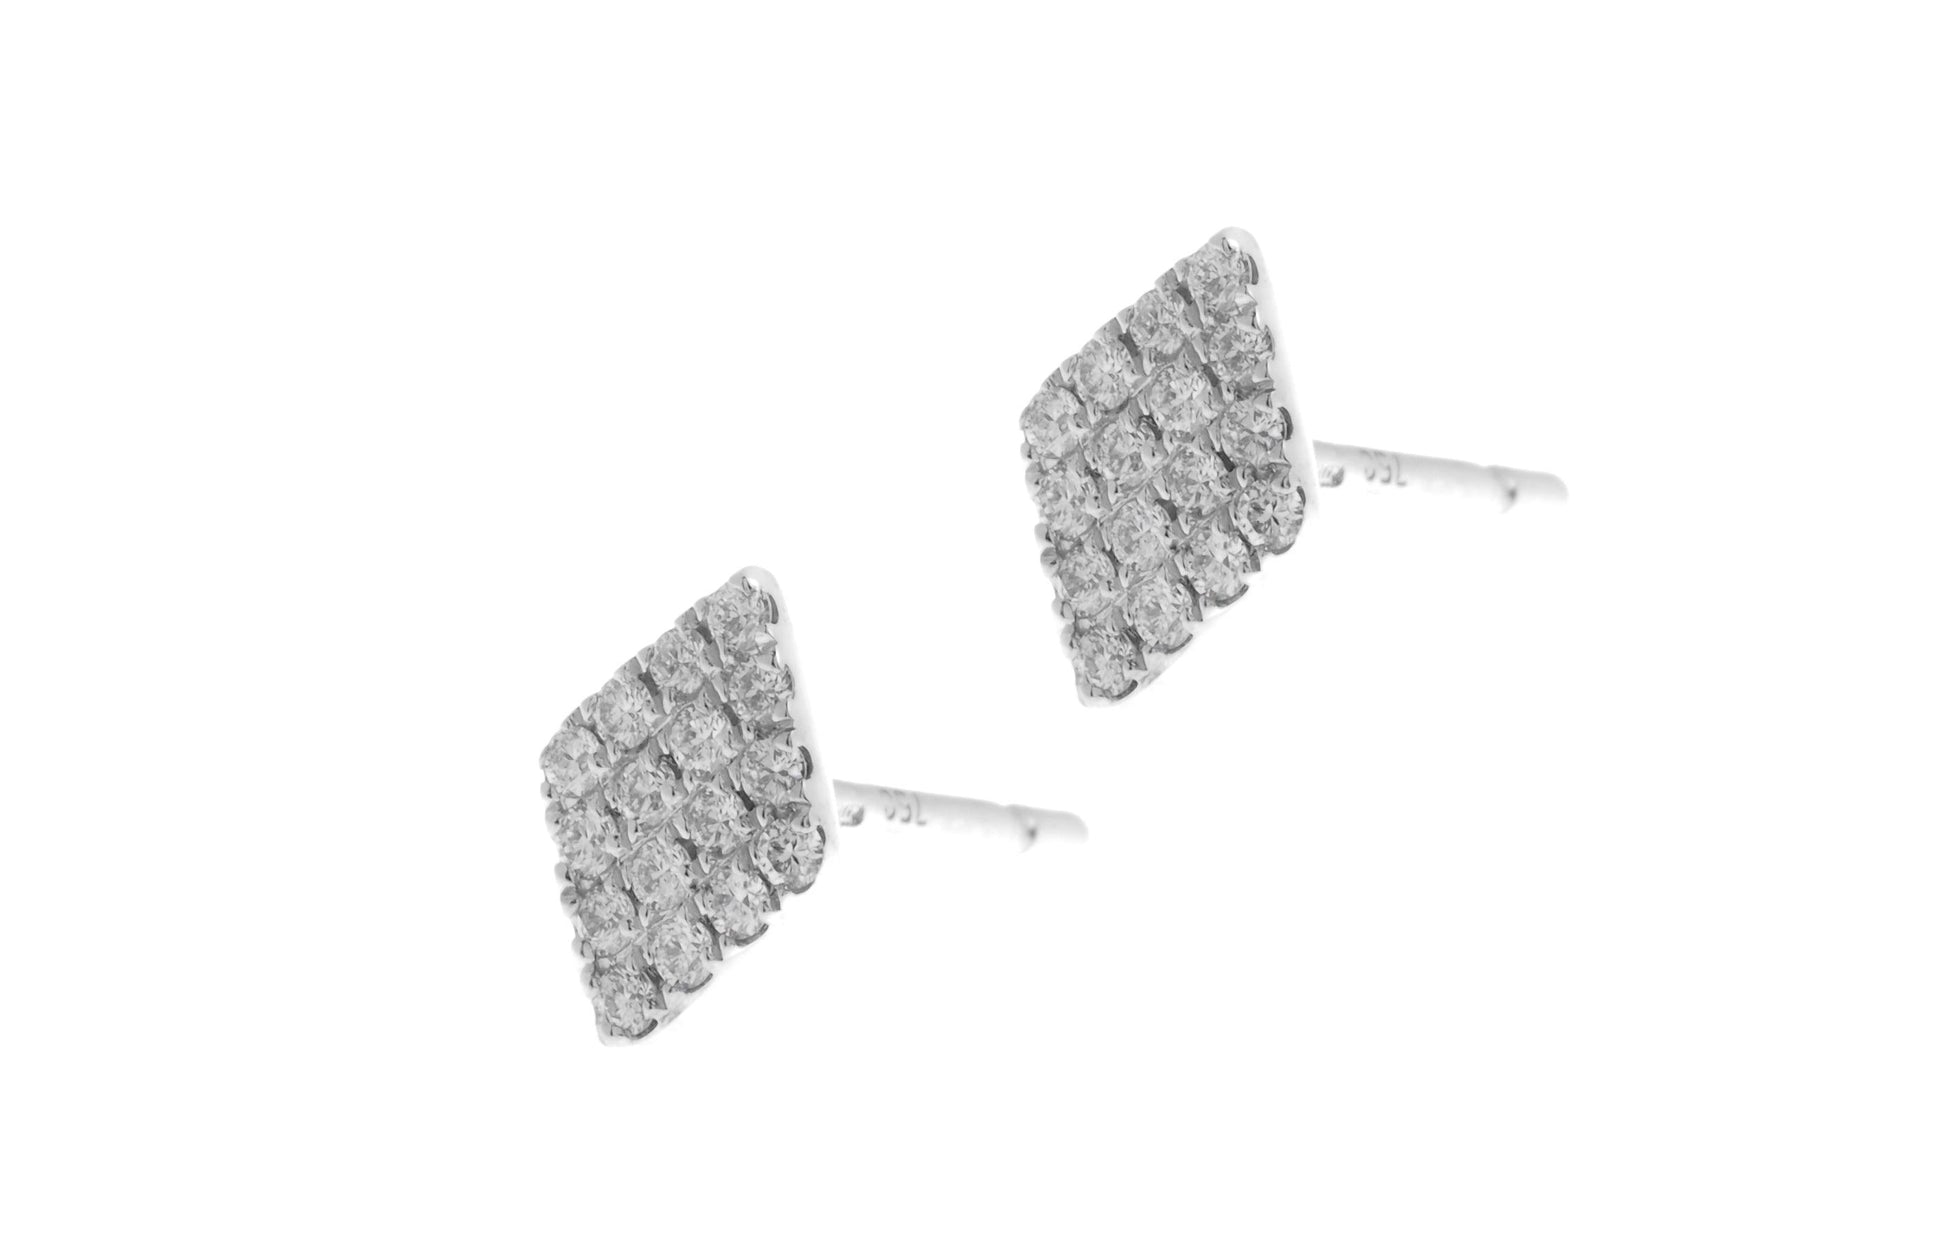 18ct White Gold Diamond Cluster Stud Earrings with push backs E42686-2 - Minar Jewellers